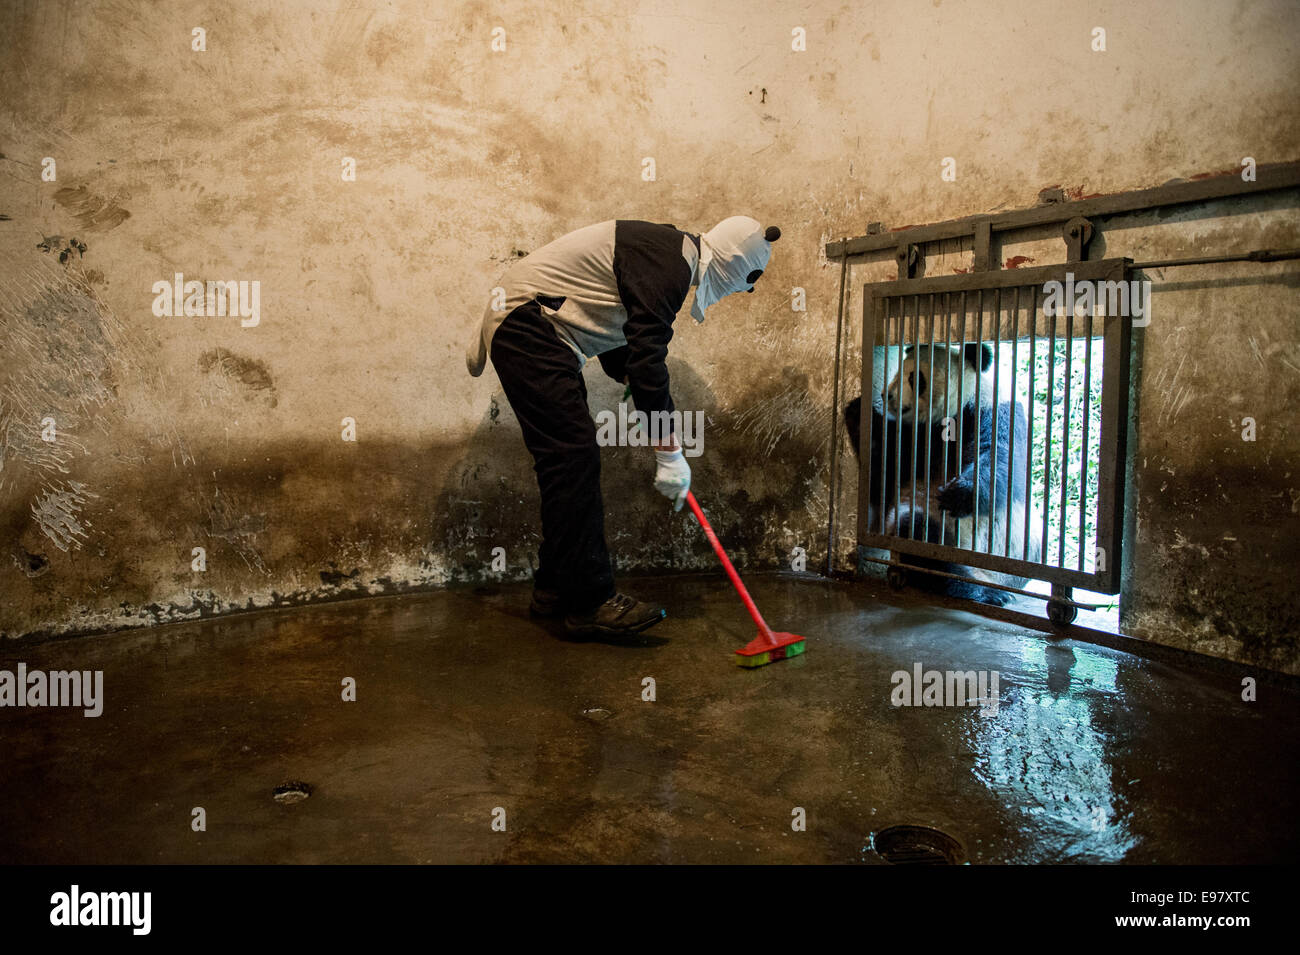 A caretaker cleans the enclosure of a Giant panda that is being trained for release into the wild at the Wolong Nature Reserve m Stock Photo